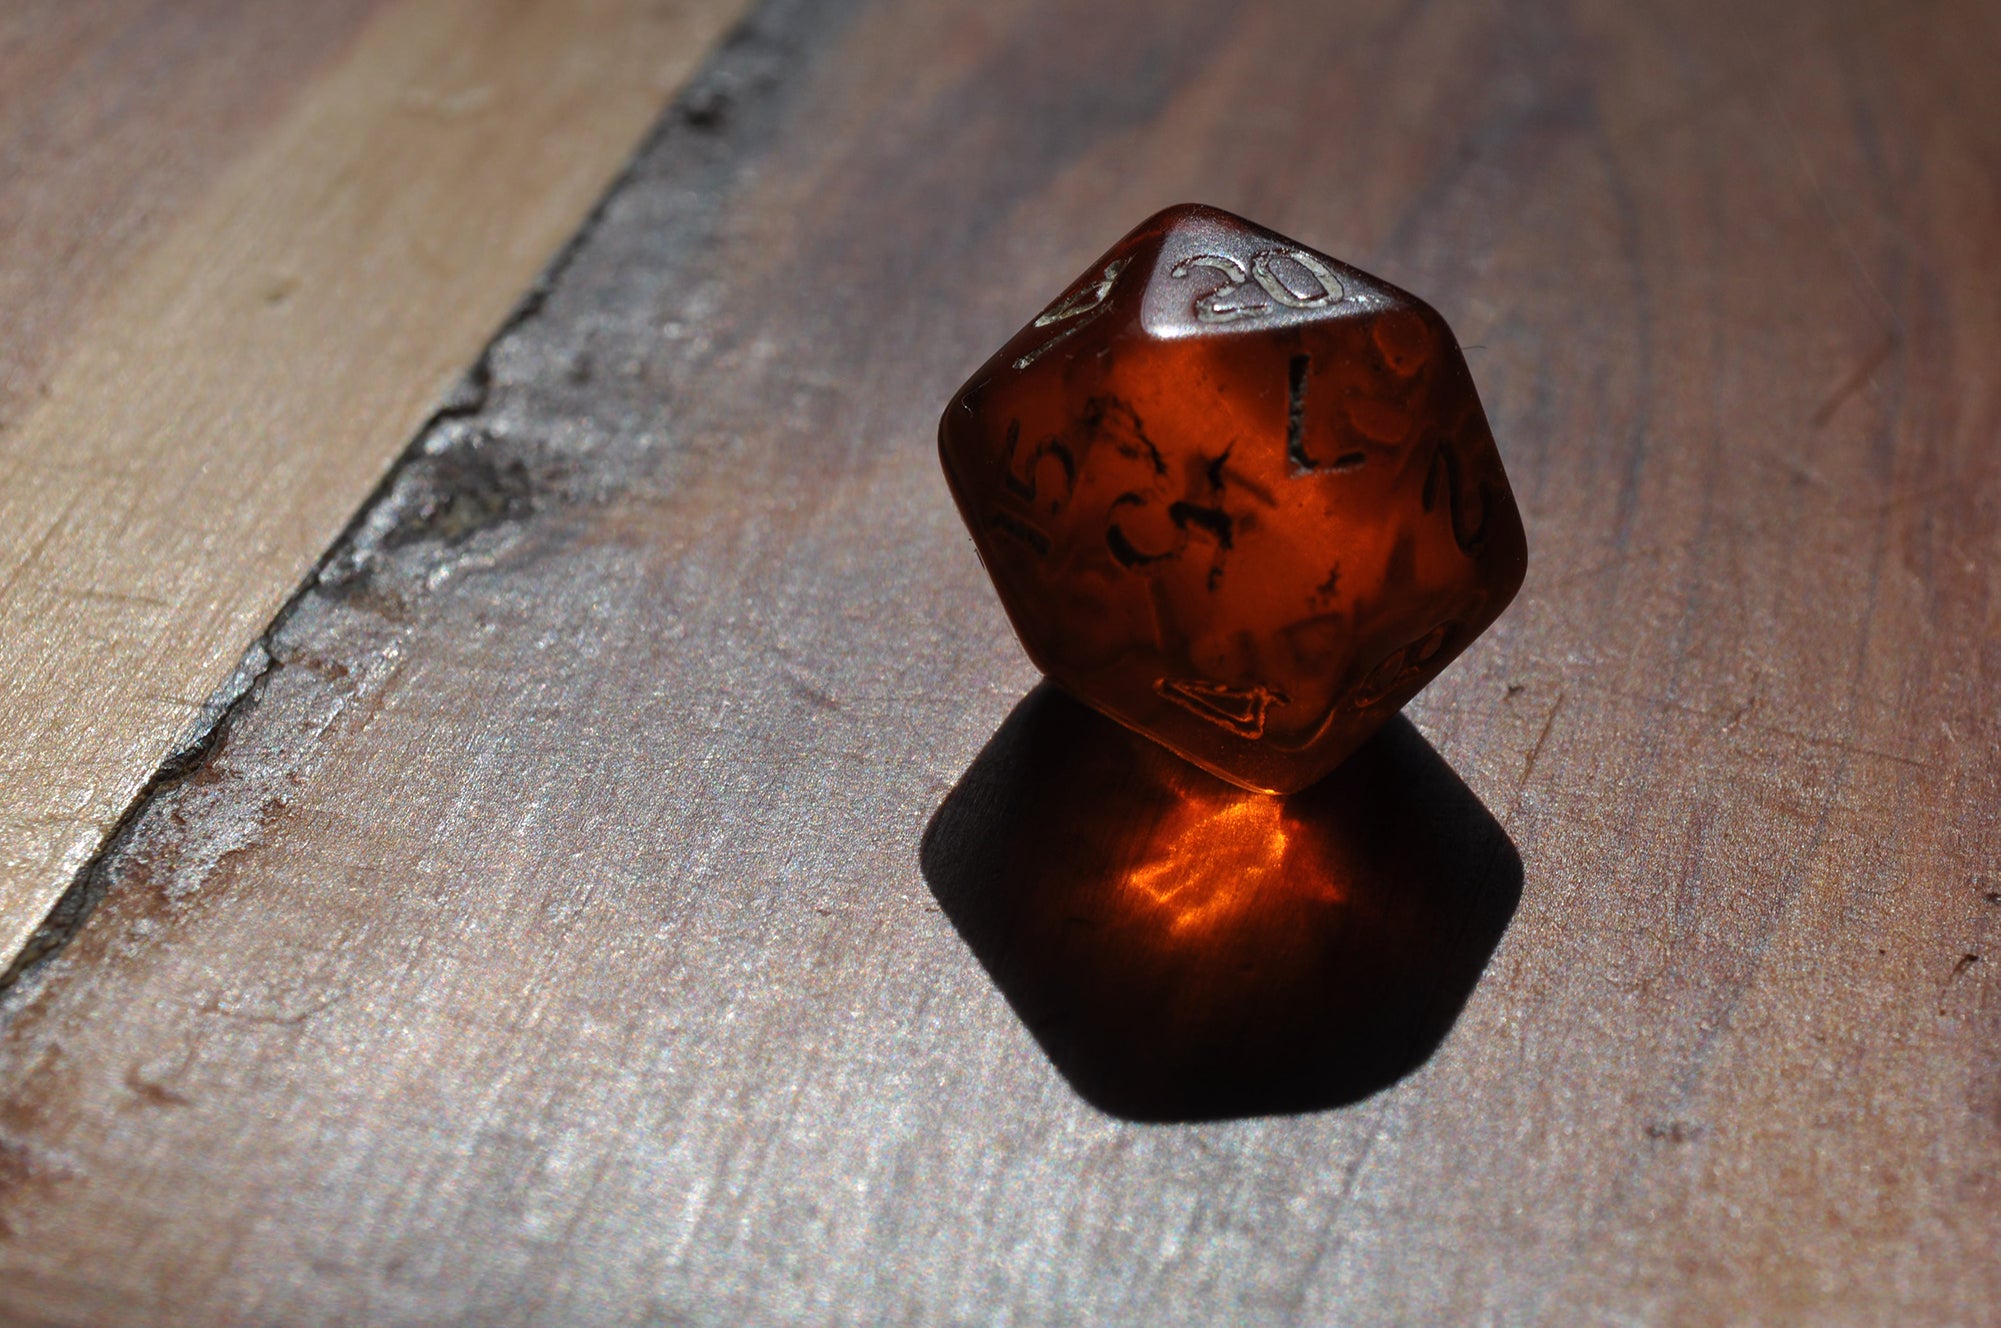 A semi-opaque amber colored dice sitting on a wooden table